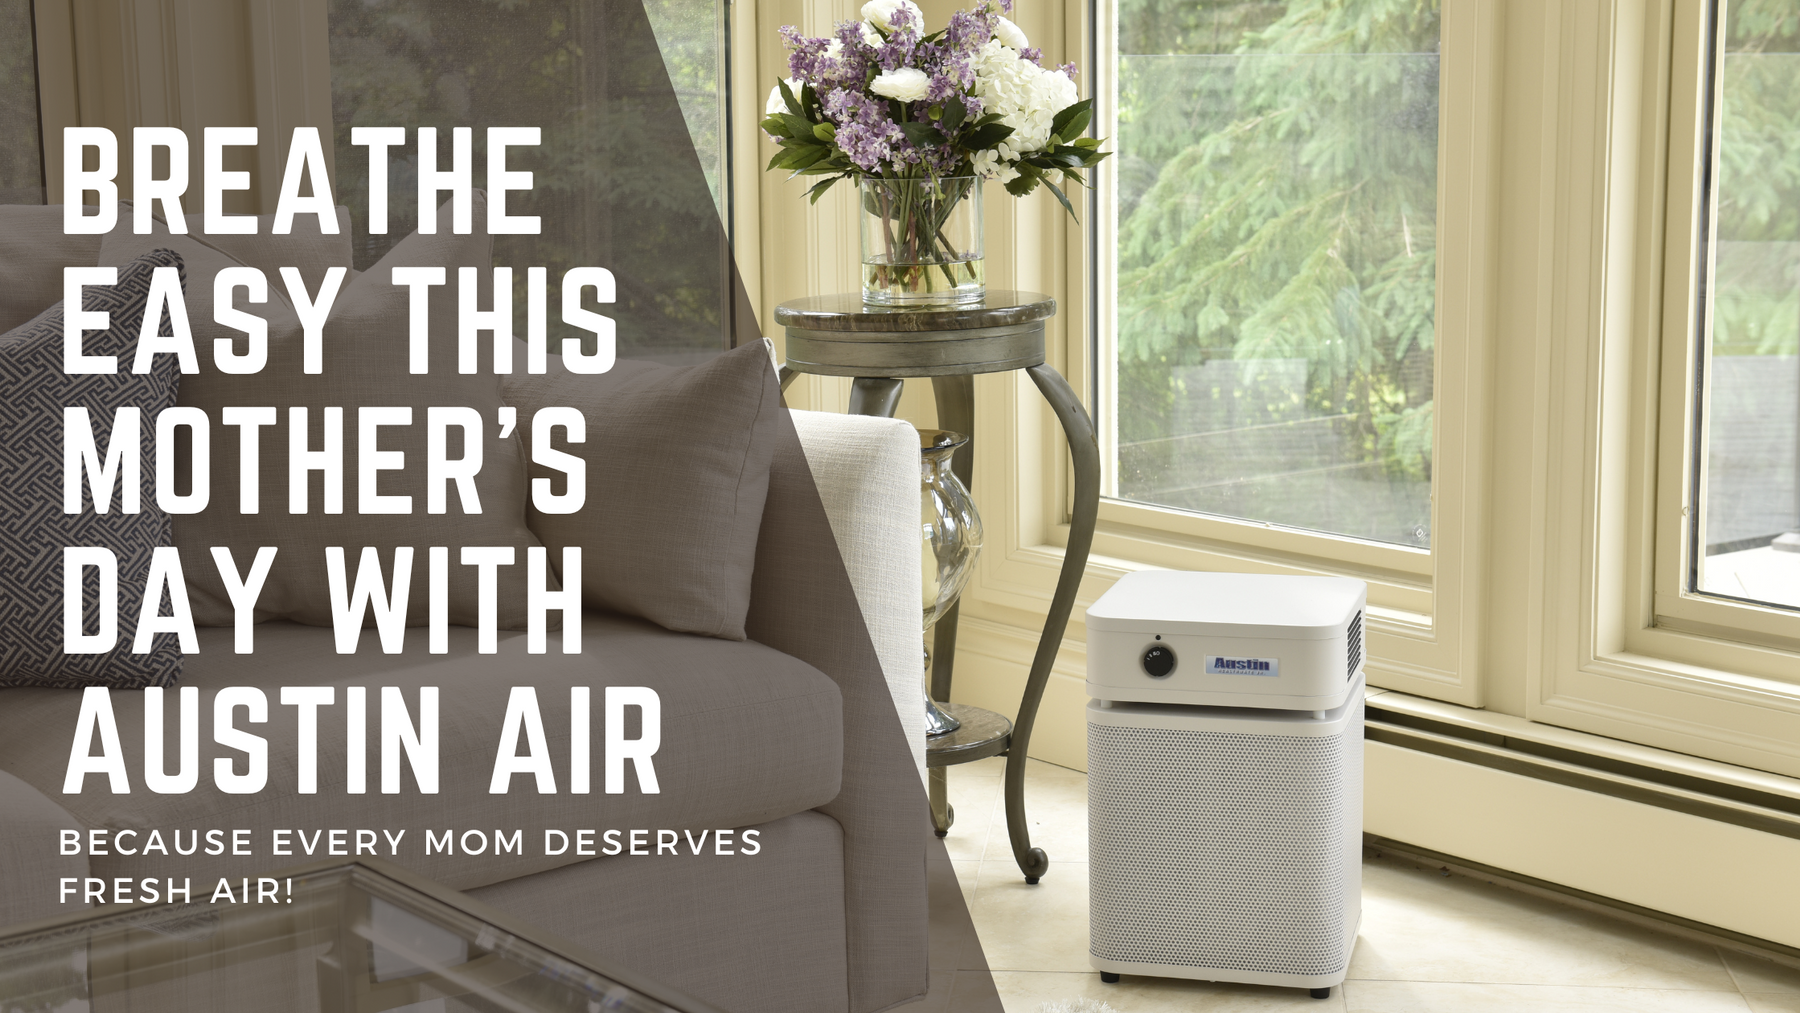 Breathe Easy this Mother’s Day with Austin Air - Because Every Mom Deserves Fresh Air!